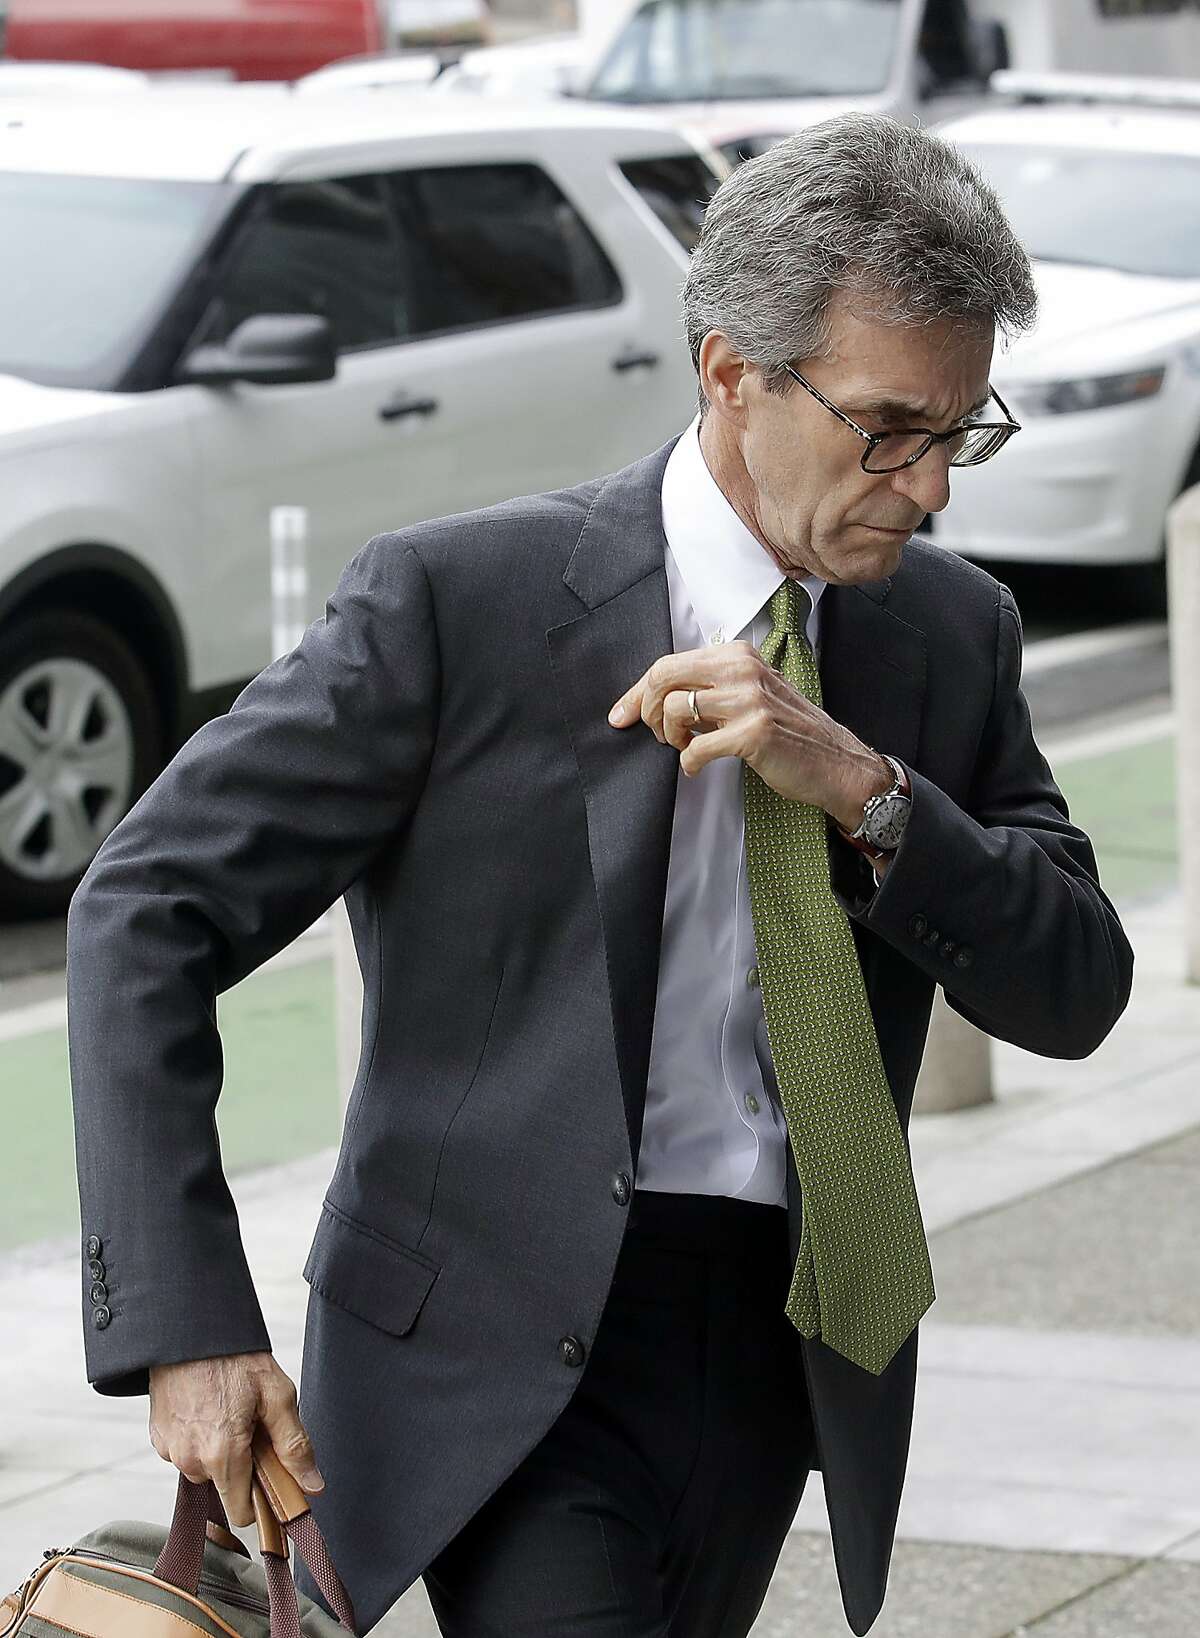 Attorney Stephen Karotkin, representing Pacific Gas & Electric Corp., arrives at a Federal Courthouse in San Francisco, Tuesday, Jan. 29, 2019. Faced with potentially ruinous lawsuits over California's recent wildfires, Pacific Gas & Electric Corp. filed for bankruptcy protection Tuesday in a move that could lead to higher bills for customers of the nation's biggest utility and reduce the size of any payouts to fire victims.